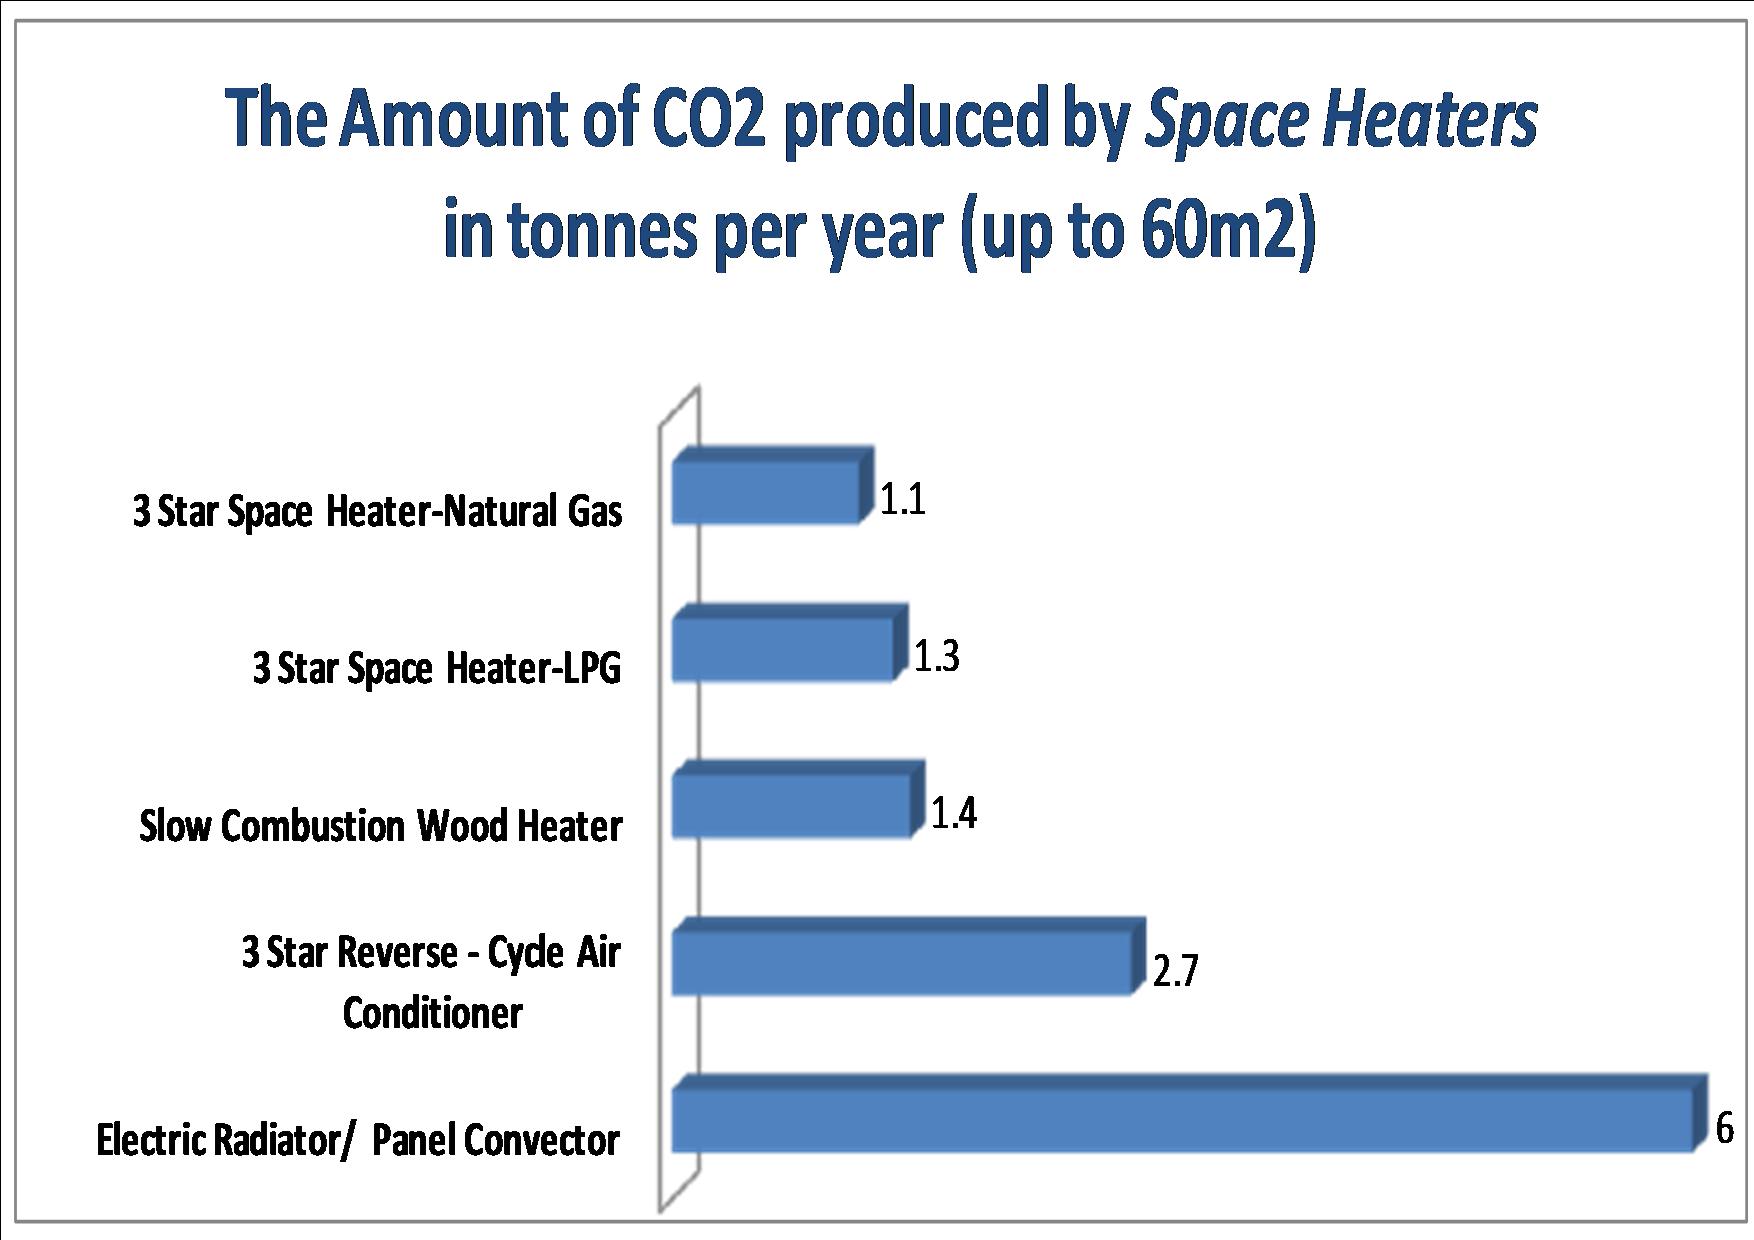 co2 of spACE HEATERS